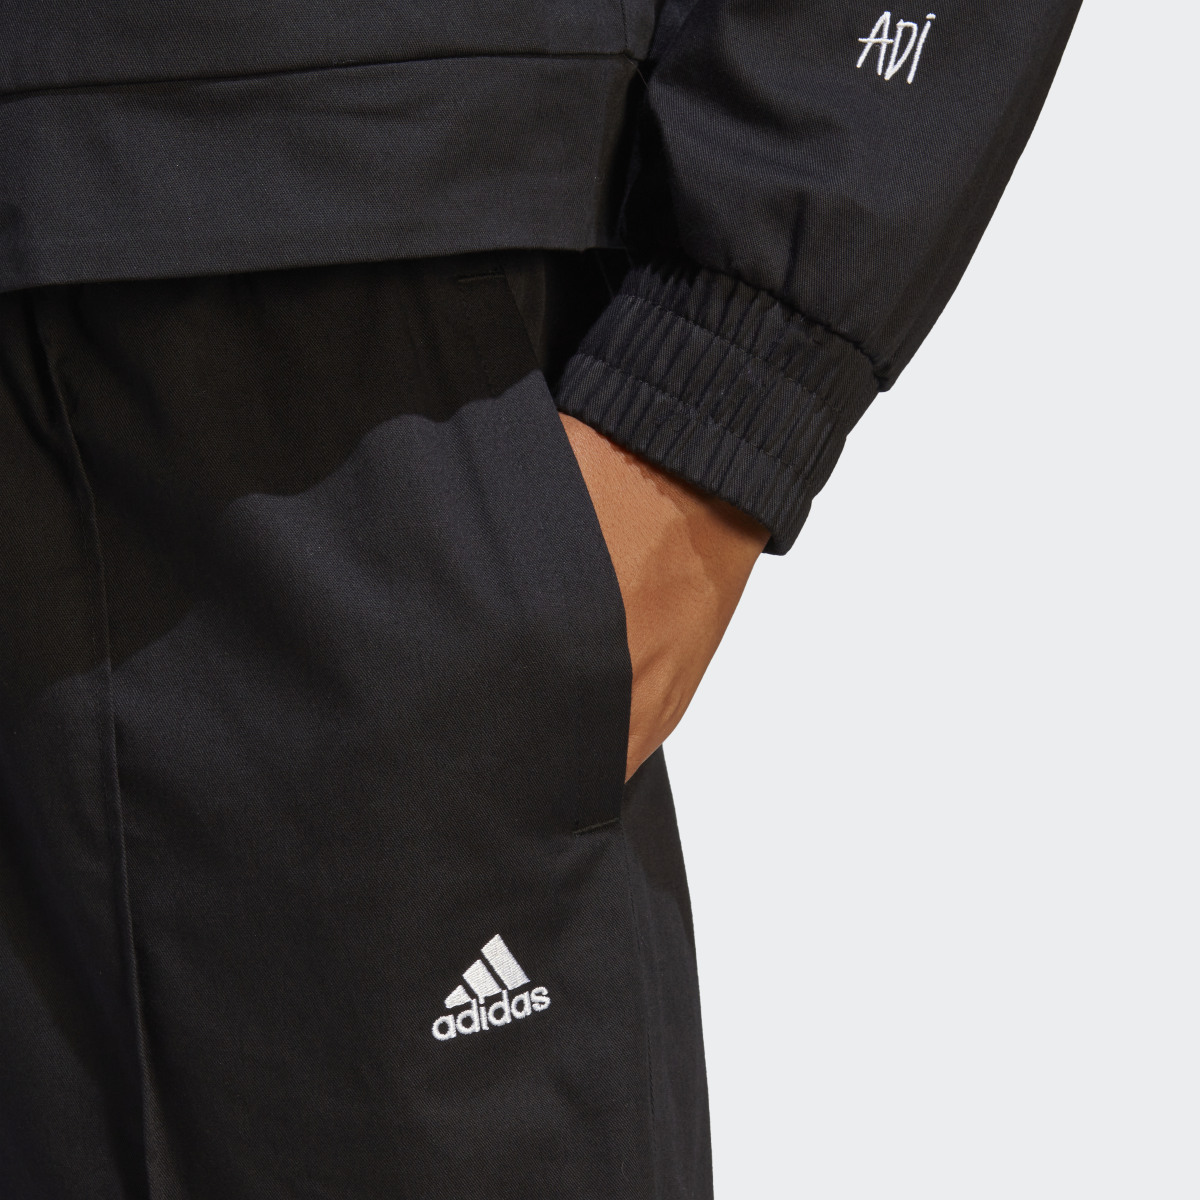 Adidas Loose Trousers with Healing Crystals-Inspired Graphics. 6